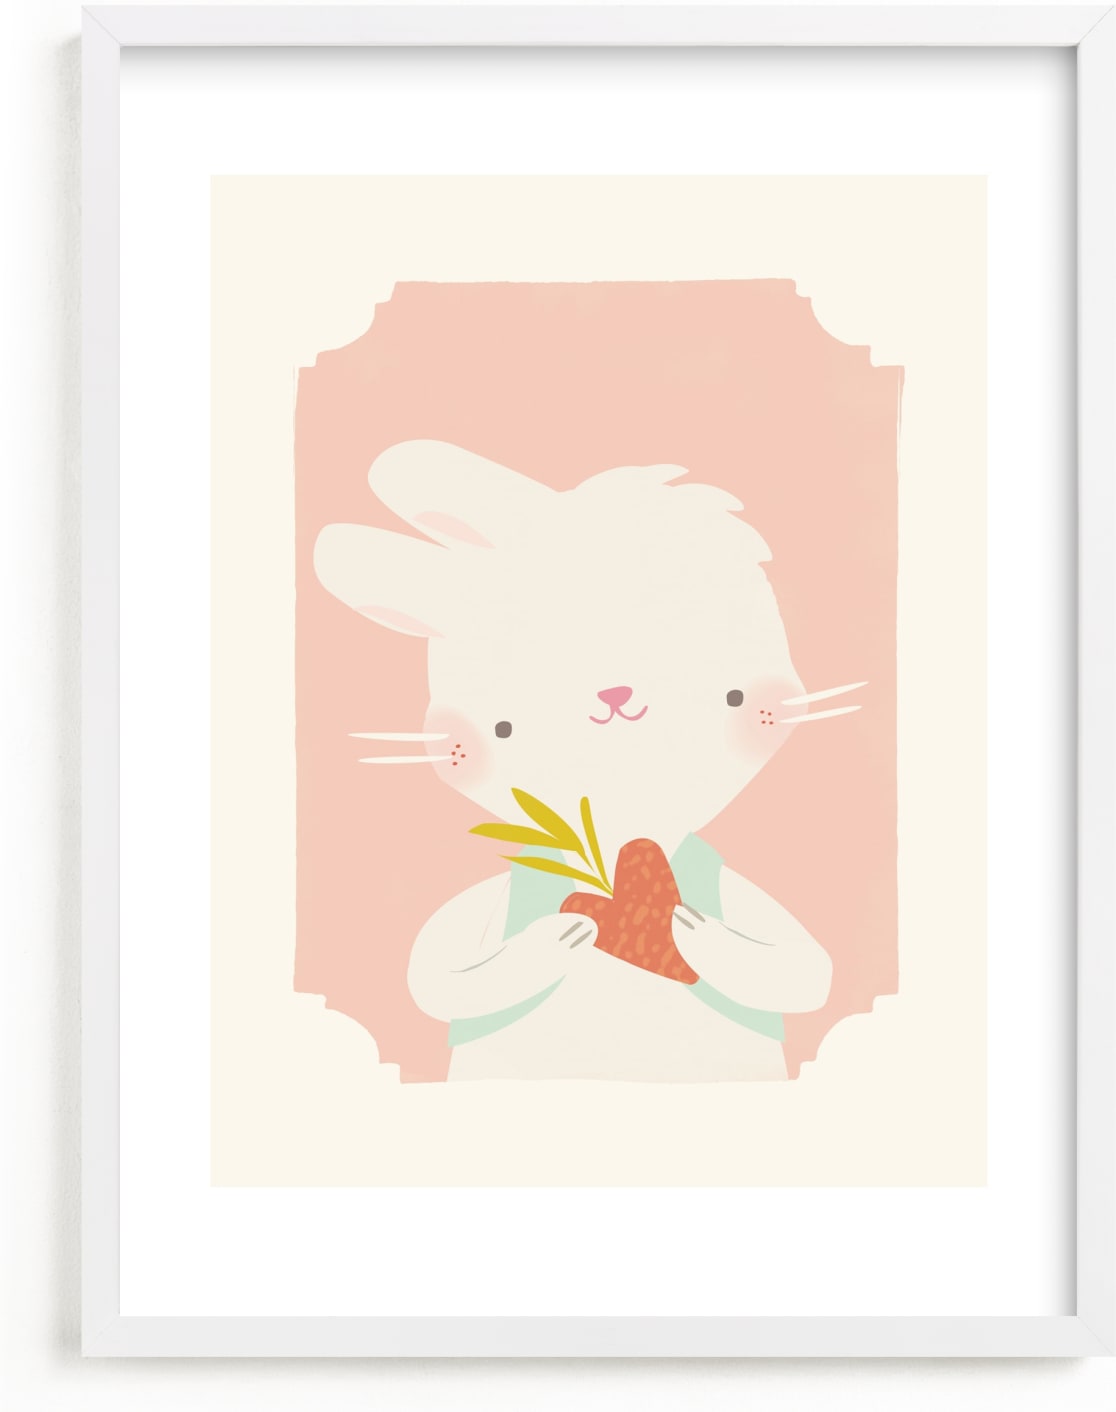 This is a colorful nursery wall art by Lori Wemple called Valentine Zoo Bunny.